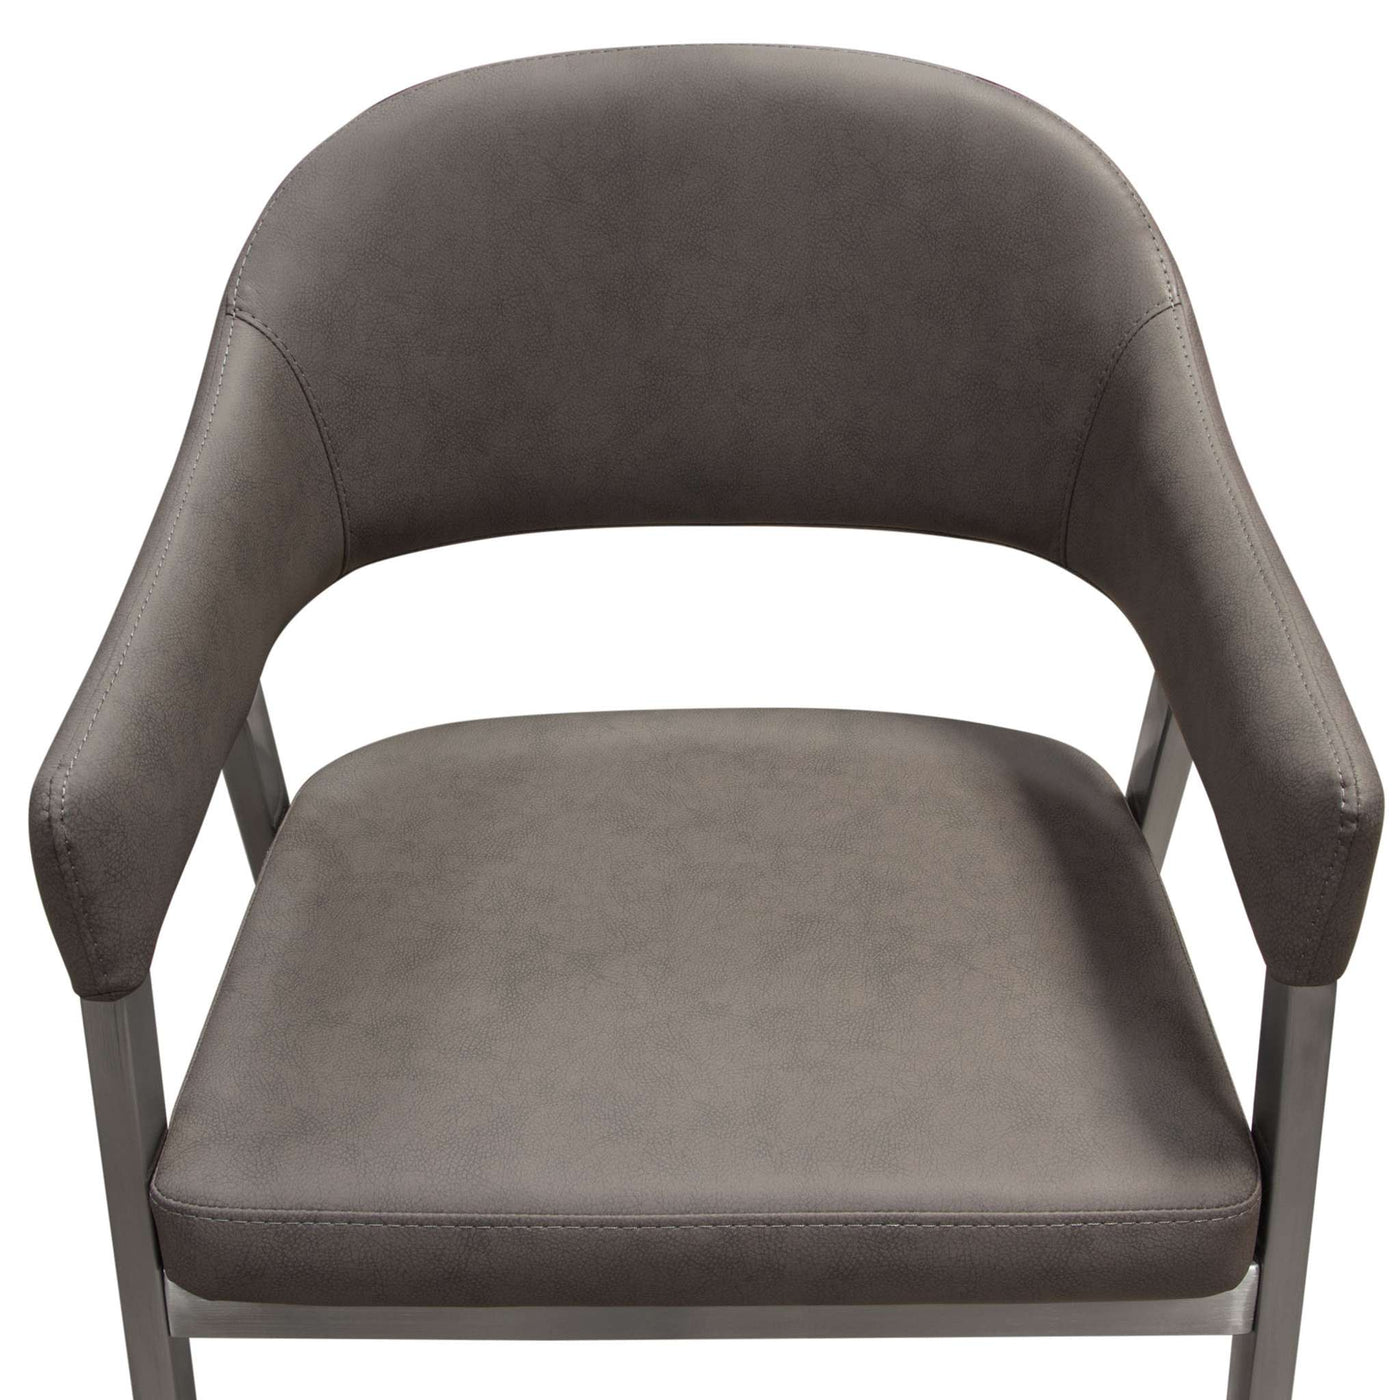 Adele Chairs in Leatherette w/ Brushed Stainless Steel Leg by Diamond Sofa